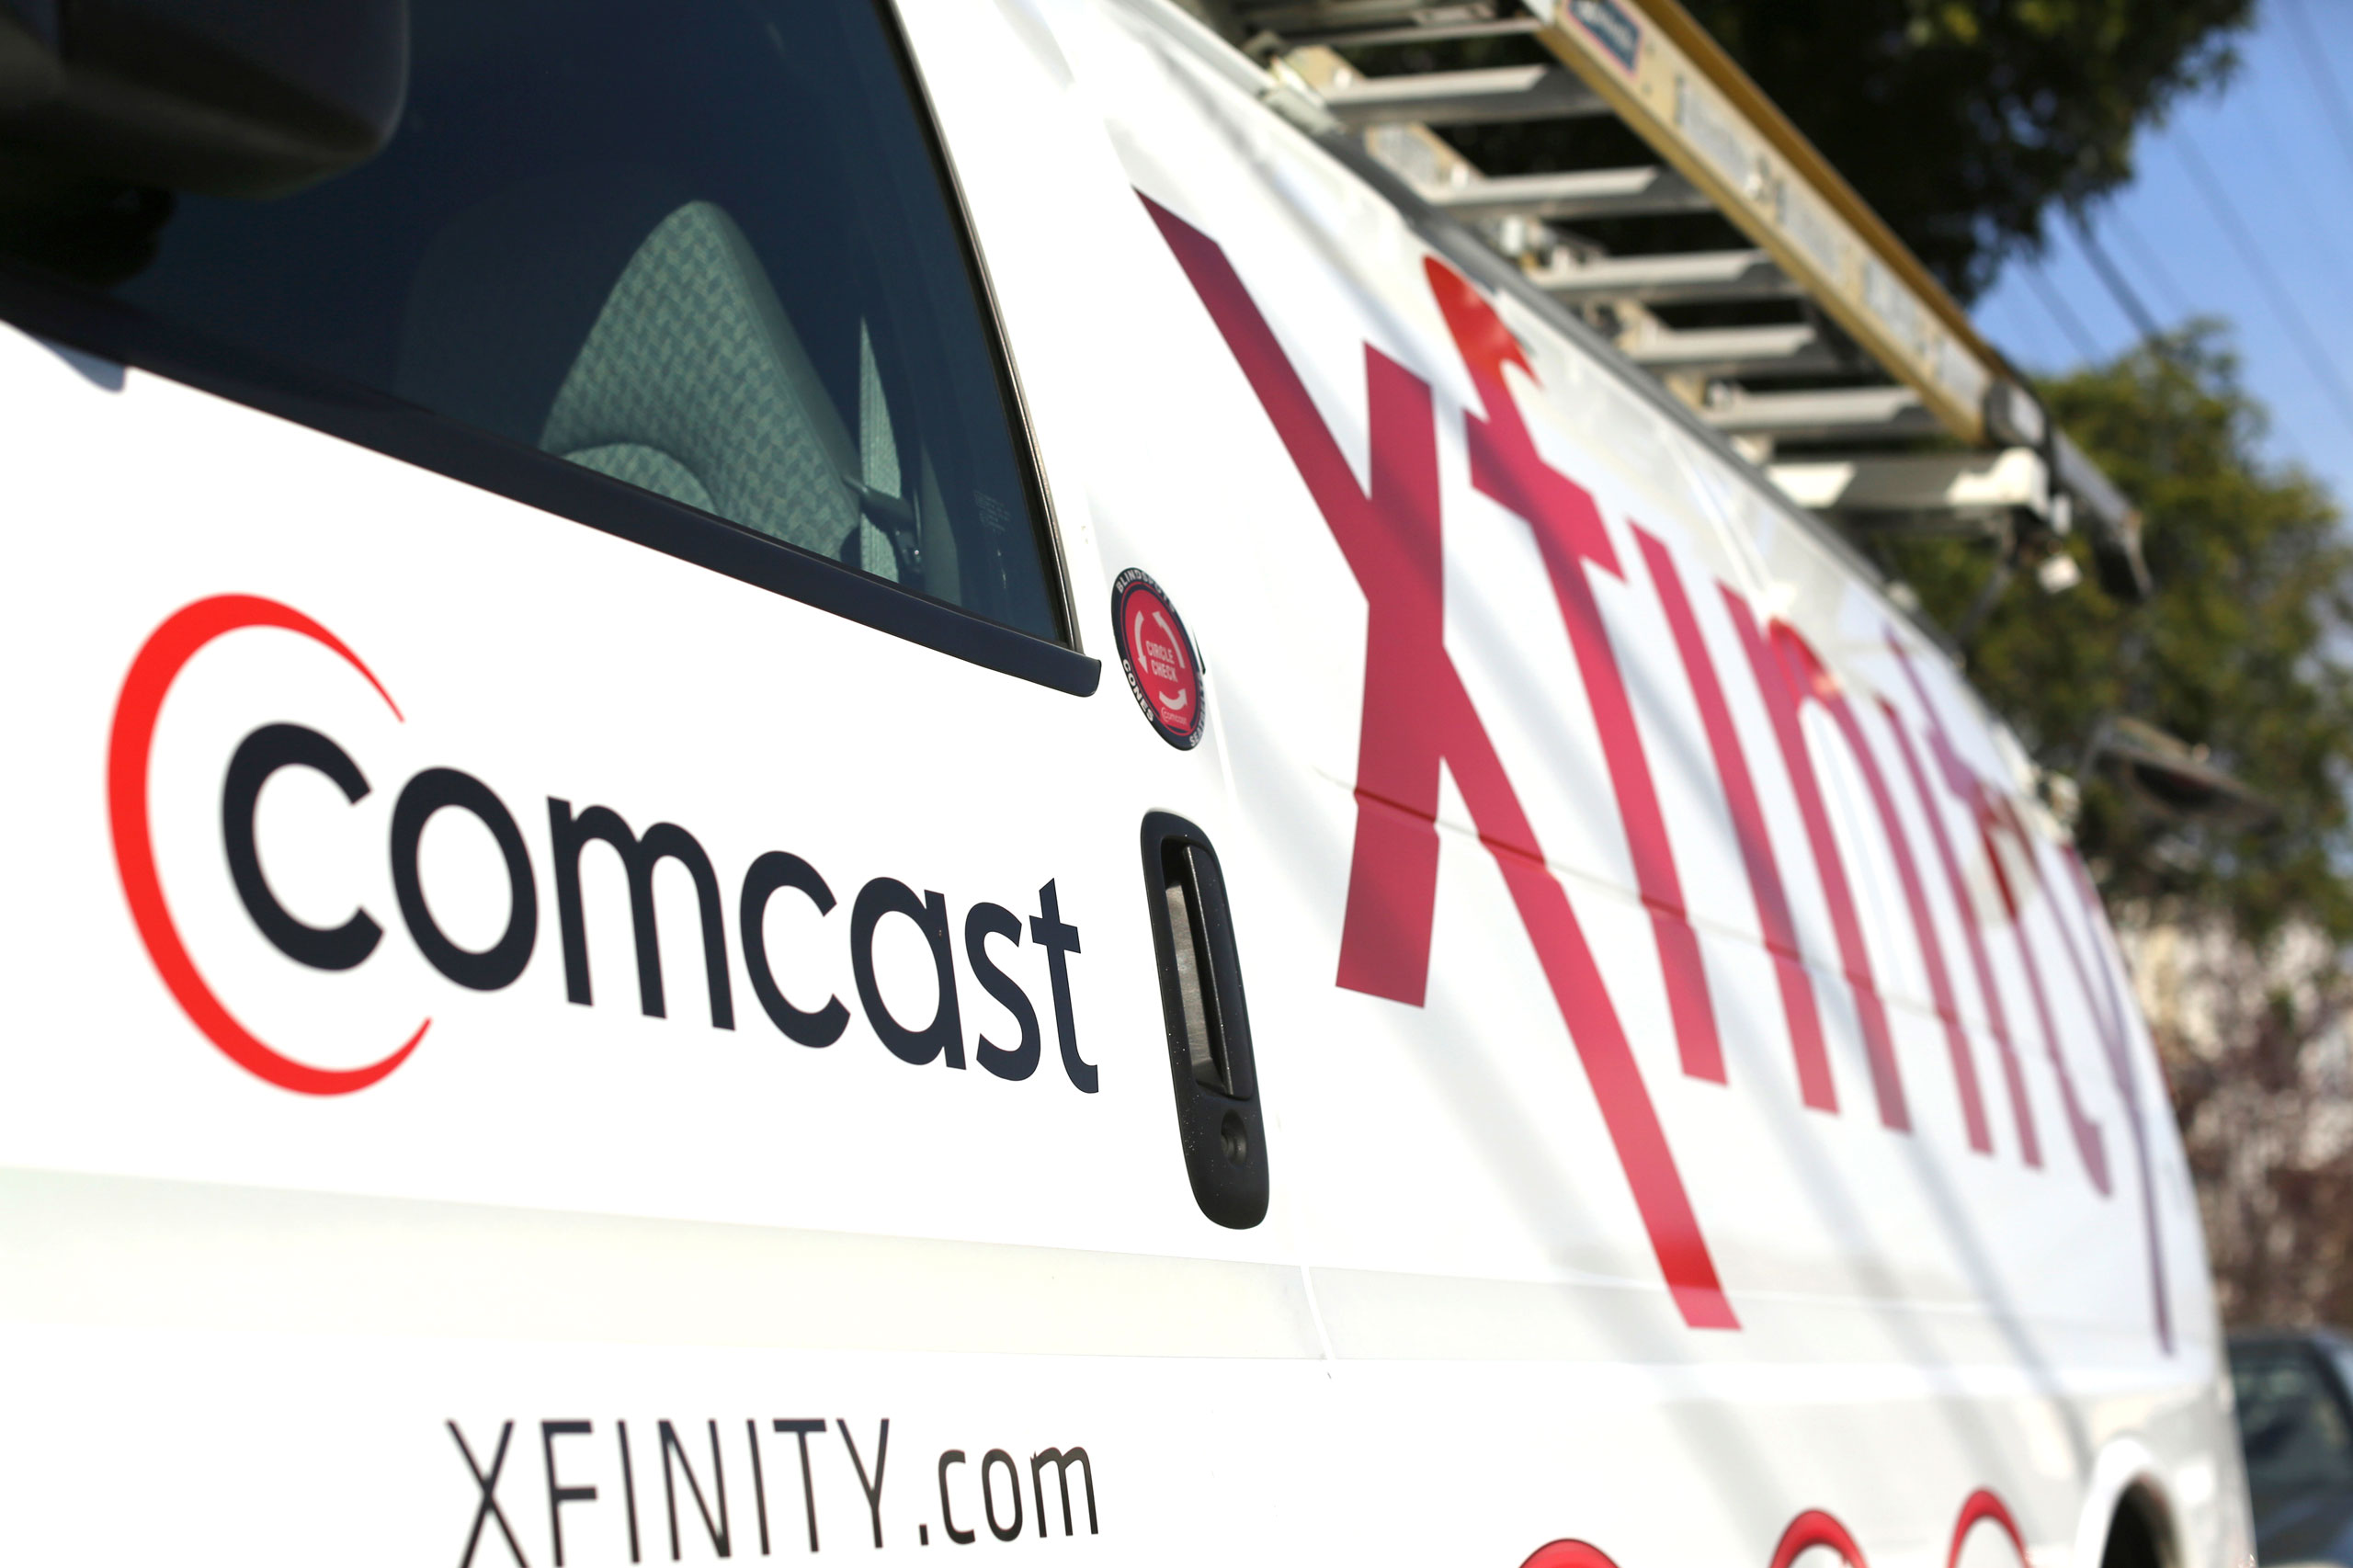 A Comcast logo on the side of a vehicle in San Francisco on Feb. 13, 2014. (Robert Galbraith—Reuters)